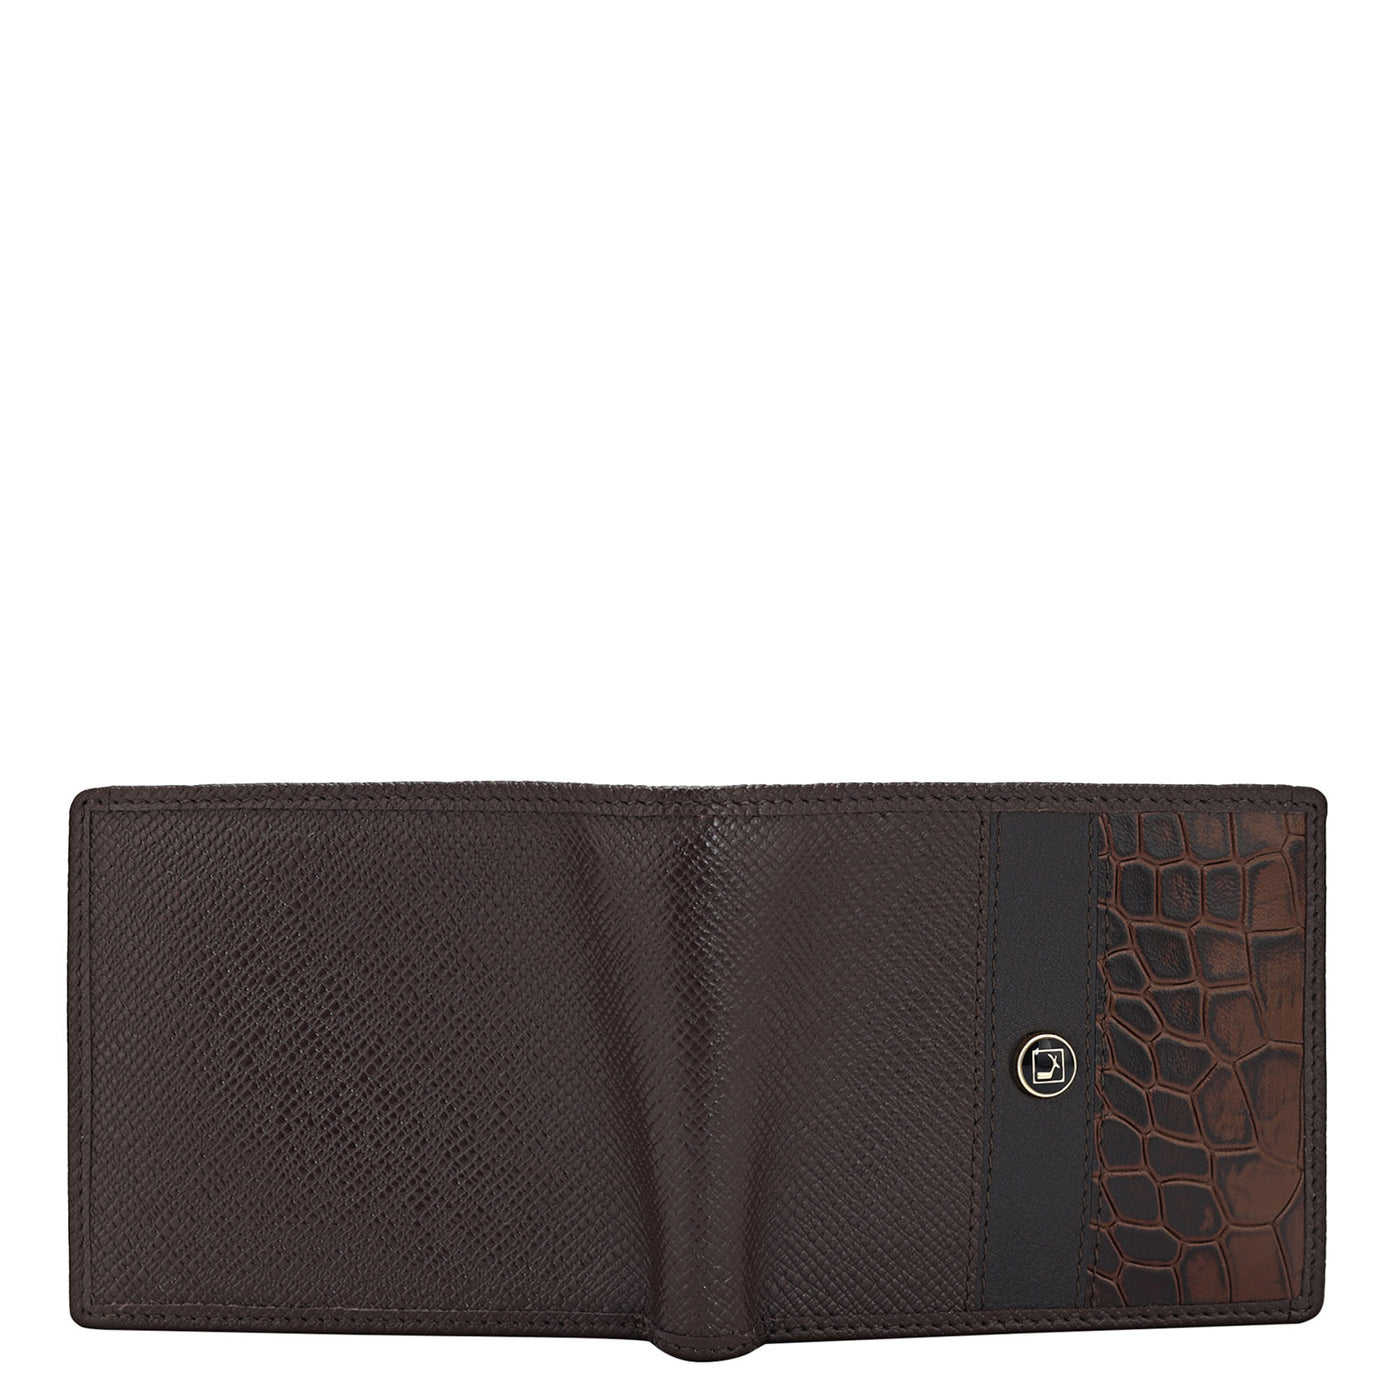 Franzy Croco Leather Mens Wallet - Chocolate